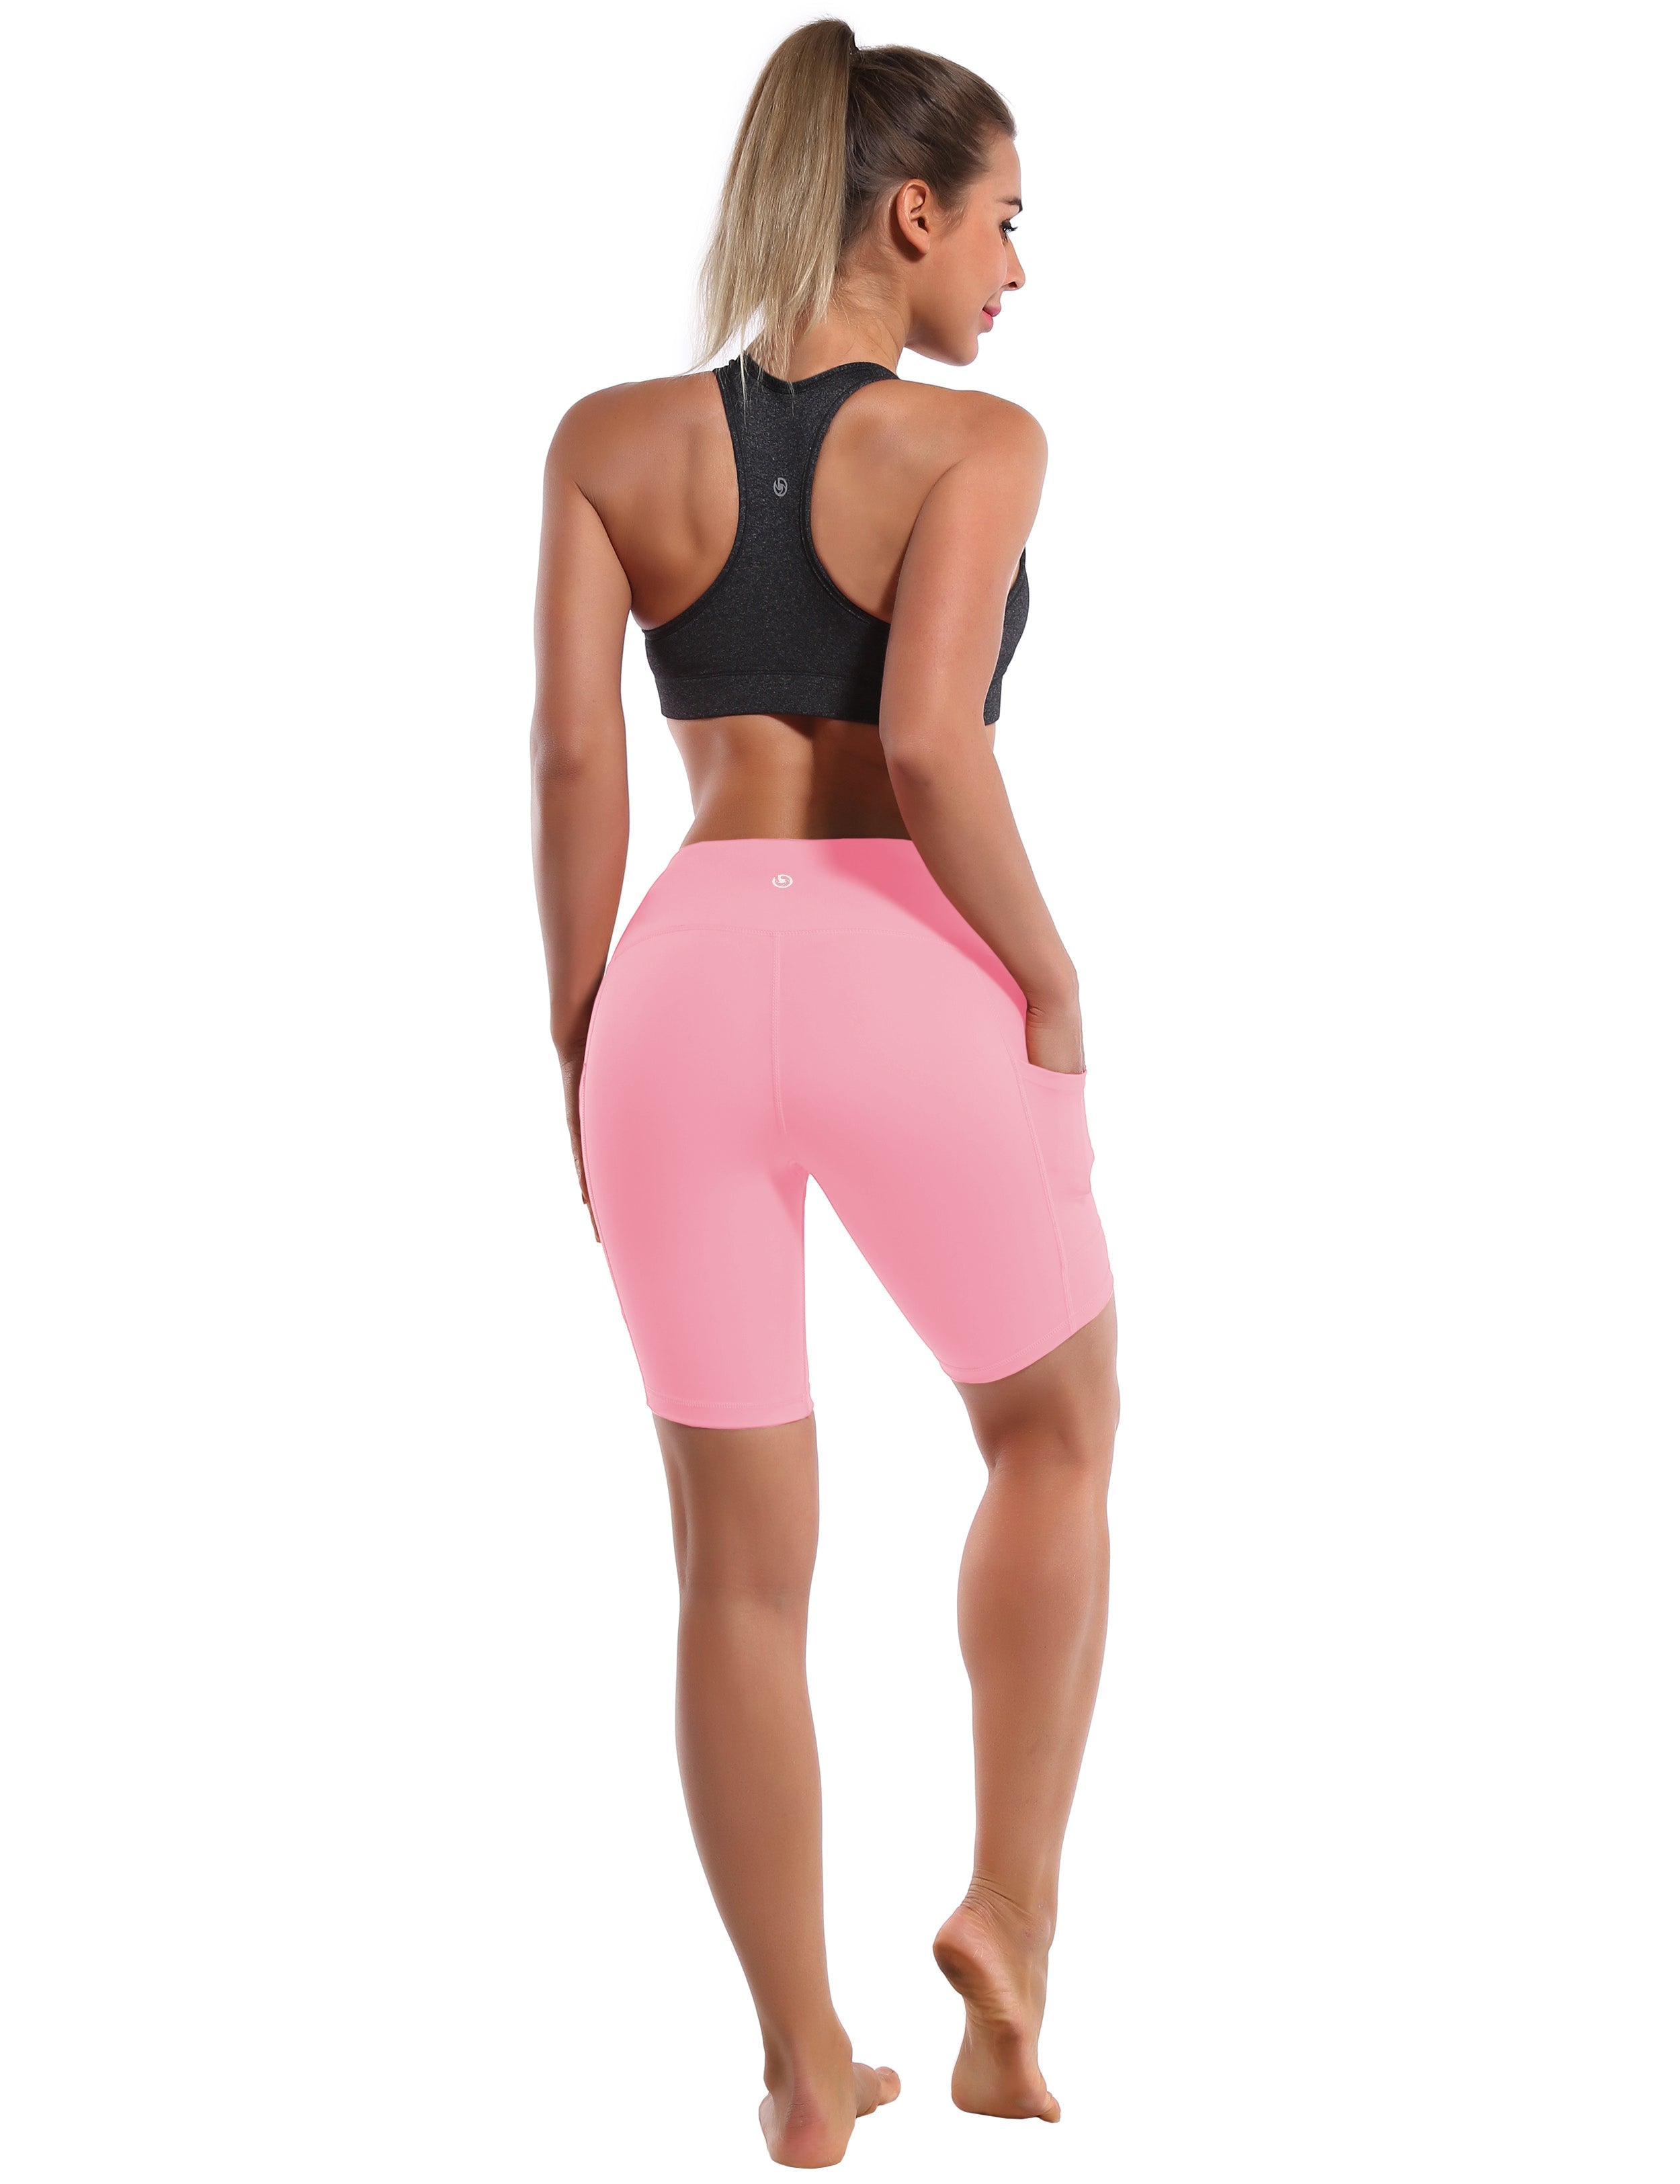 8" Side Pockets Pilates Shorts lemonadepink Sleek, soft, smooth and totally comfortable: our newest style is here. Softest-ever fabric High elasticity High density 4-way stretch Fabric doesn't attract lint easily No see-through Moisture-wicking Machine wash 75% Nylon, 25% Spandex